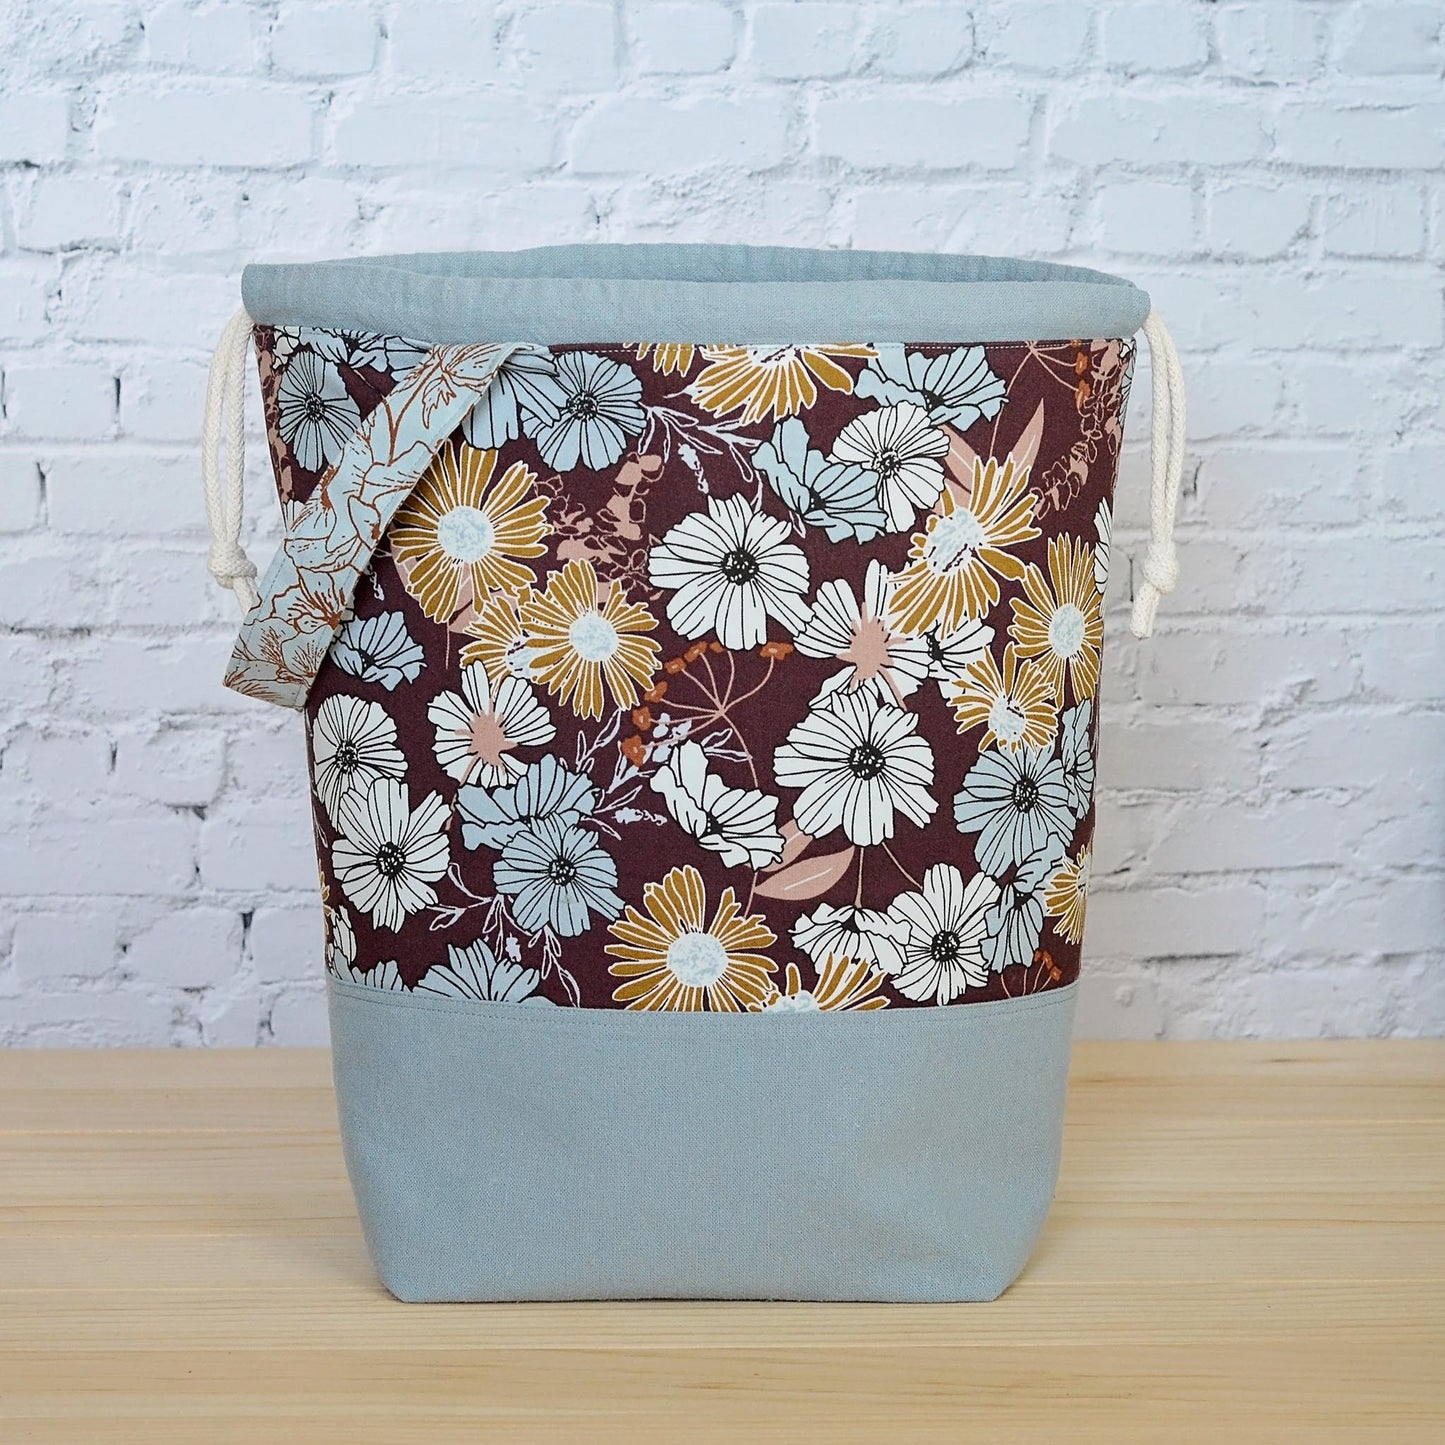 Large knitting bag with pockets and grab handle, made in beautiful floral fabric.  Made by Yellow Petal Handmade in Canada.